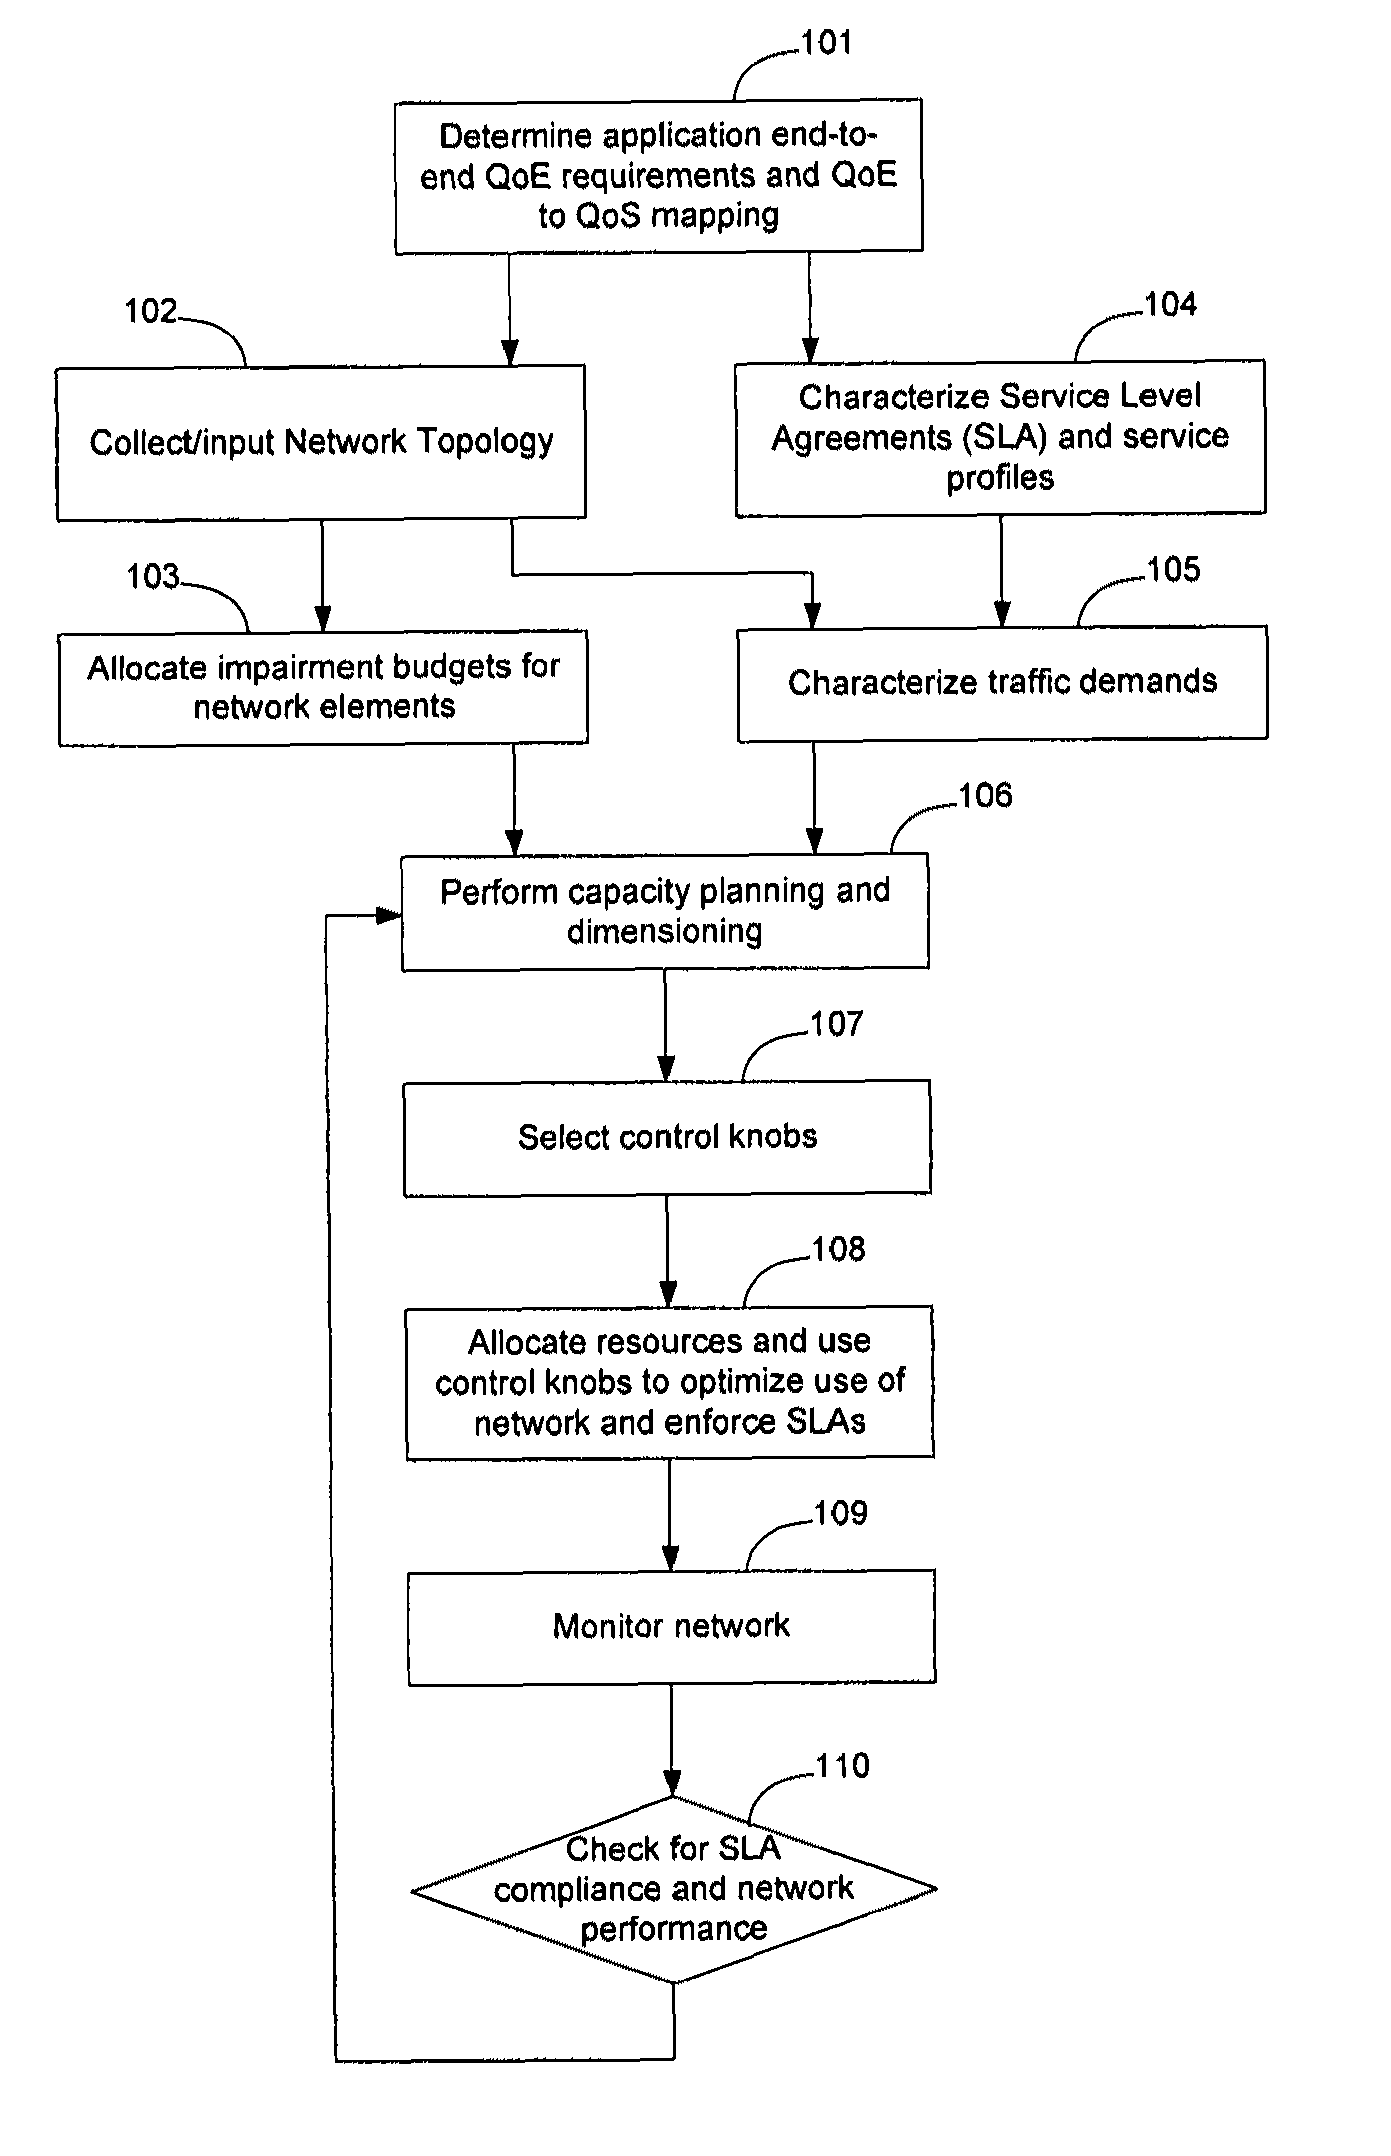 Method and apparatus for designing, updating and operating a network based on quality of experience